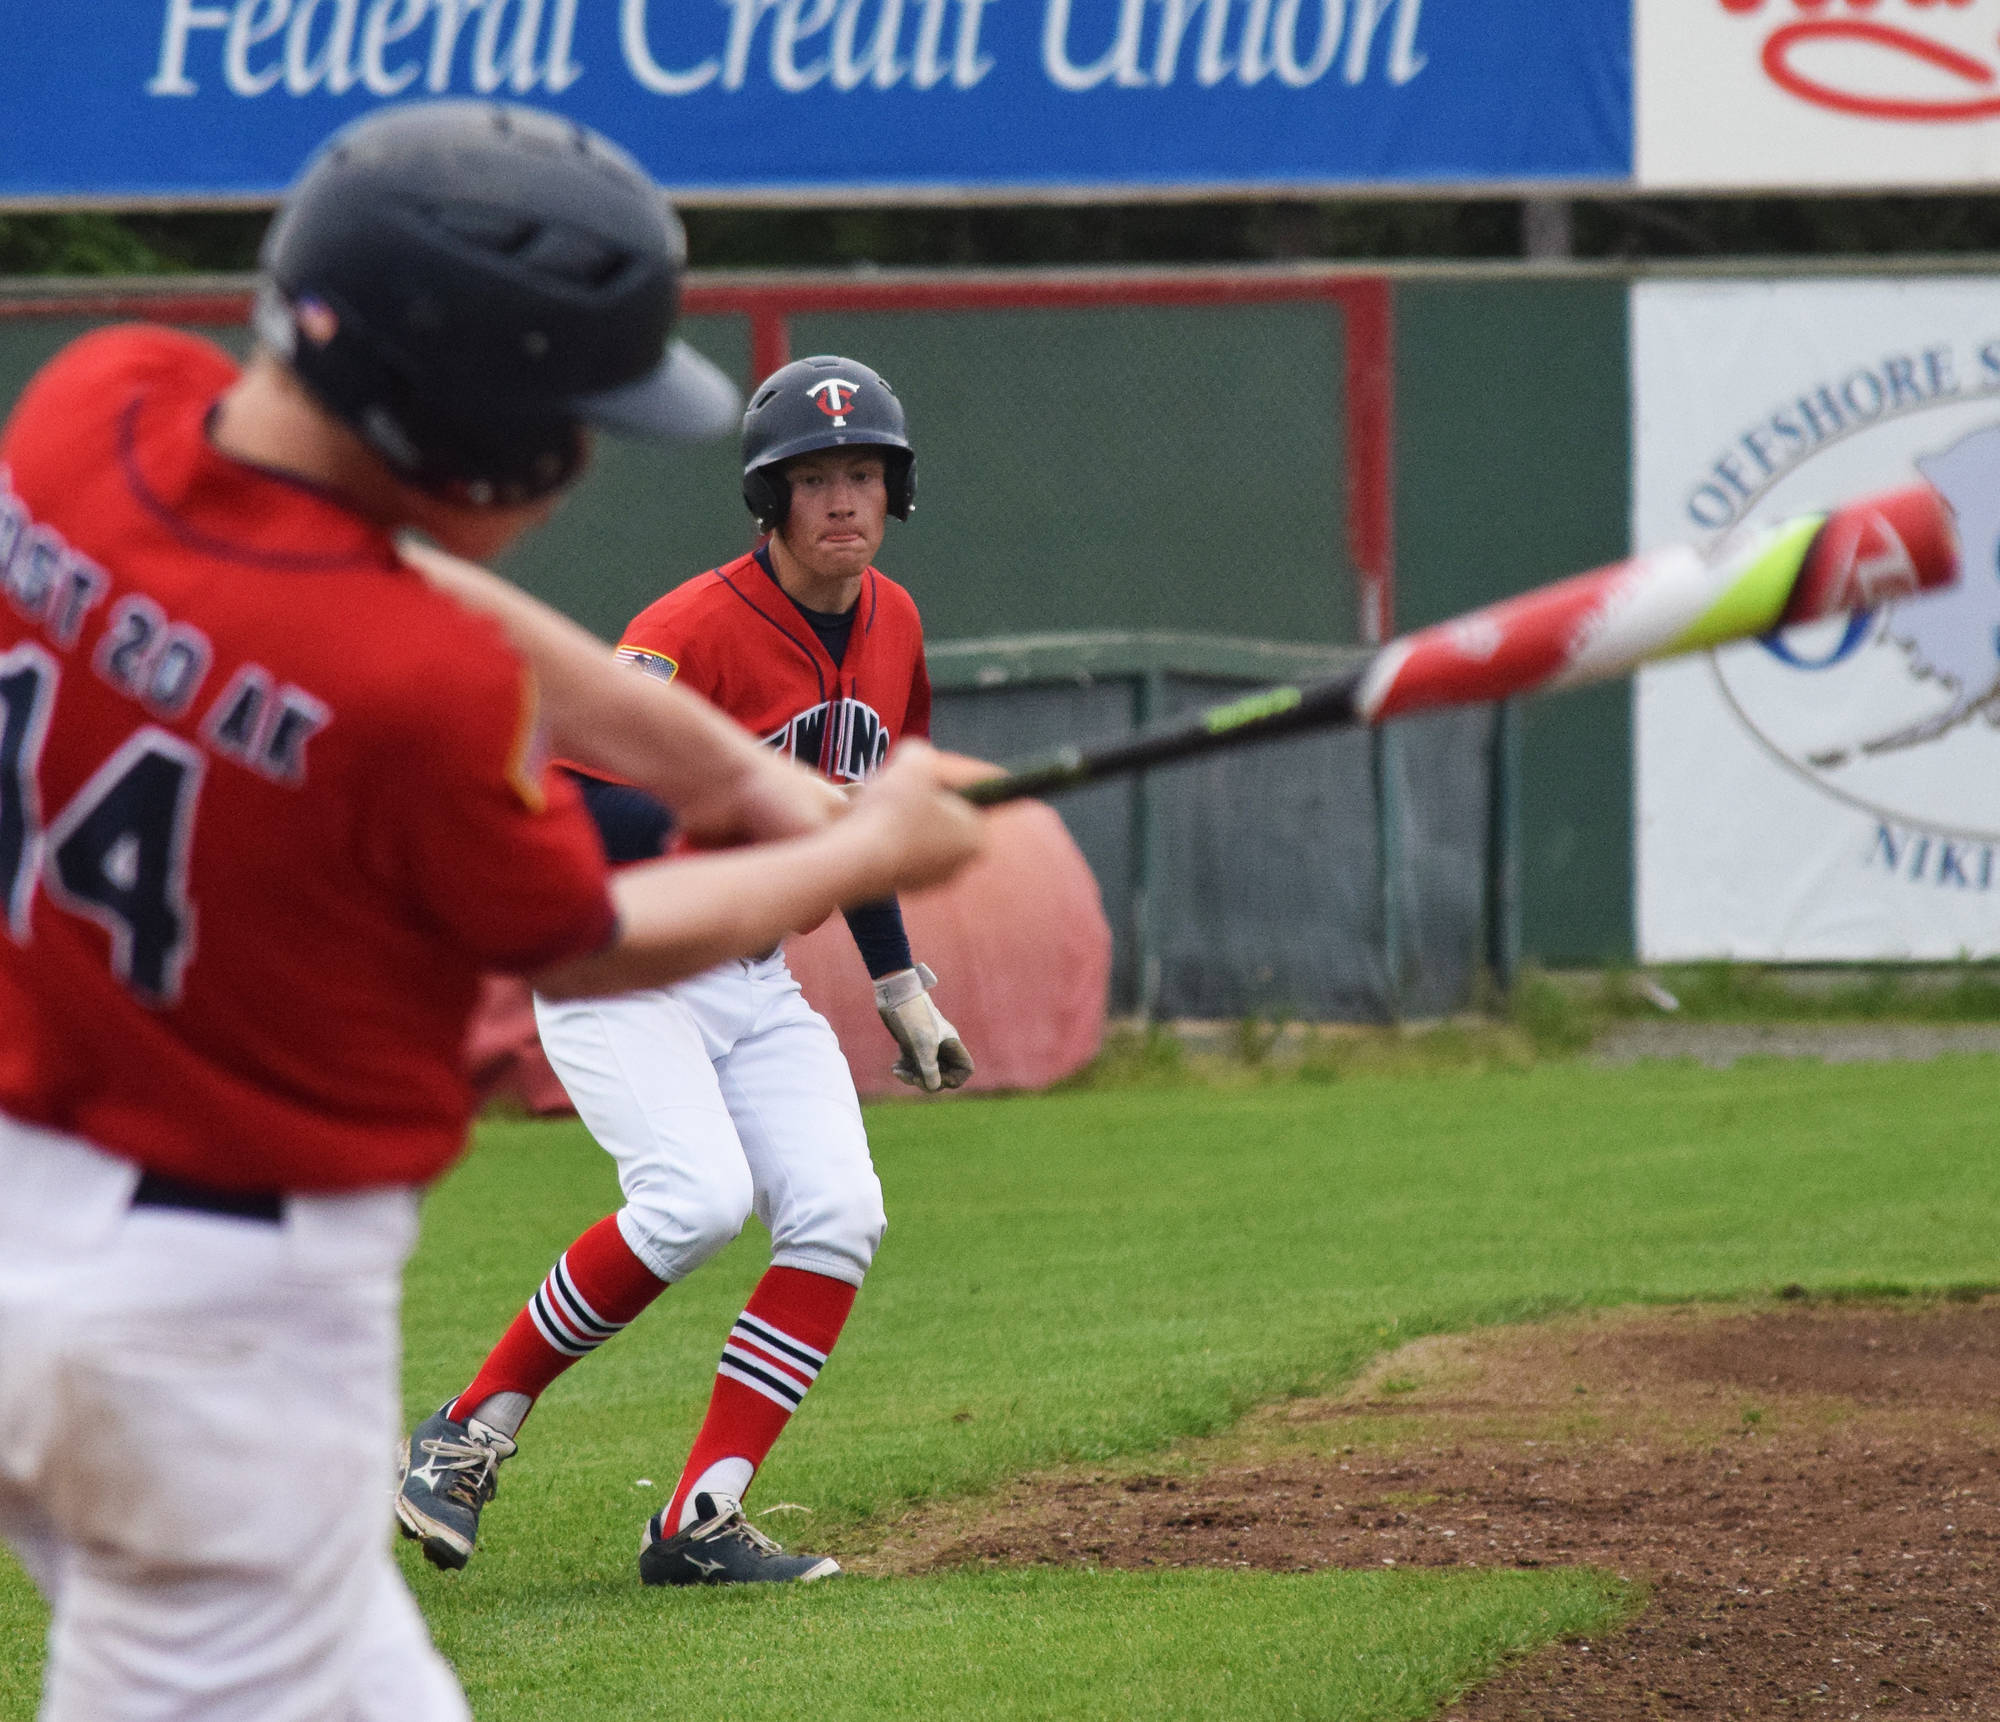 Post 20 Twins’ Jeremy Kupferschmid watches teammate Mose Hayes take a swing against South Post 4 Saturday at Coral Seymour Memorial Park in Kenai. (Photo by Joey Klecka/Peninsula Clarion)